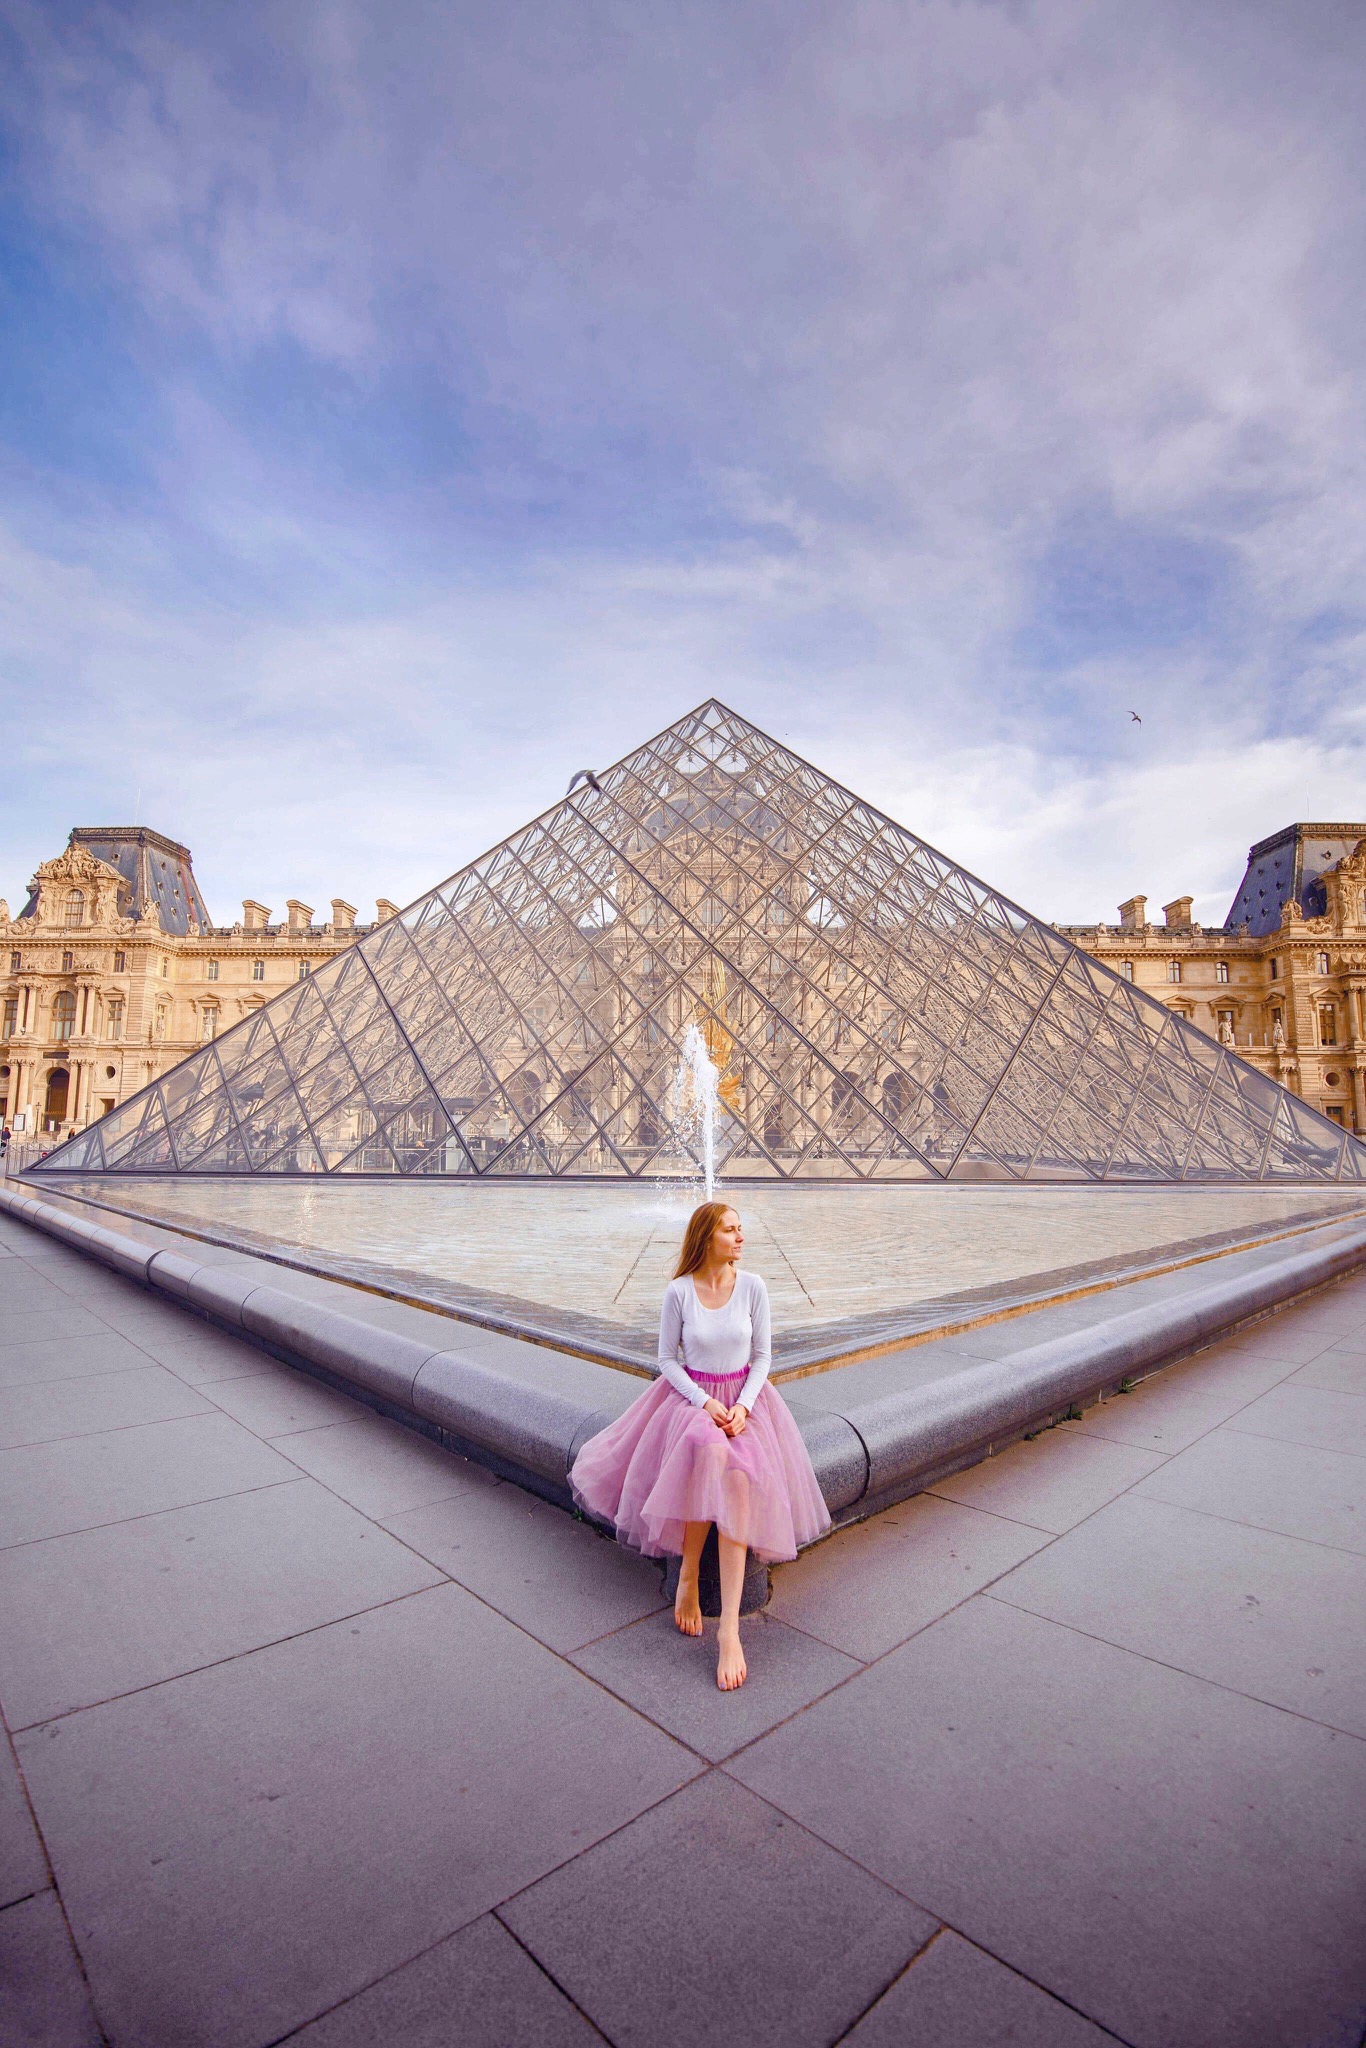 a barefoot girl in pink skirt stting in front of the pyramids of the Louvre